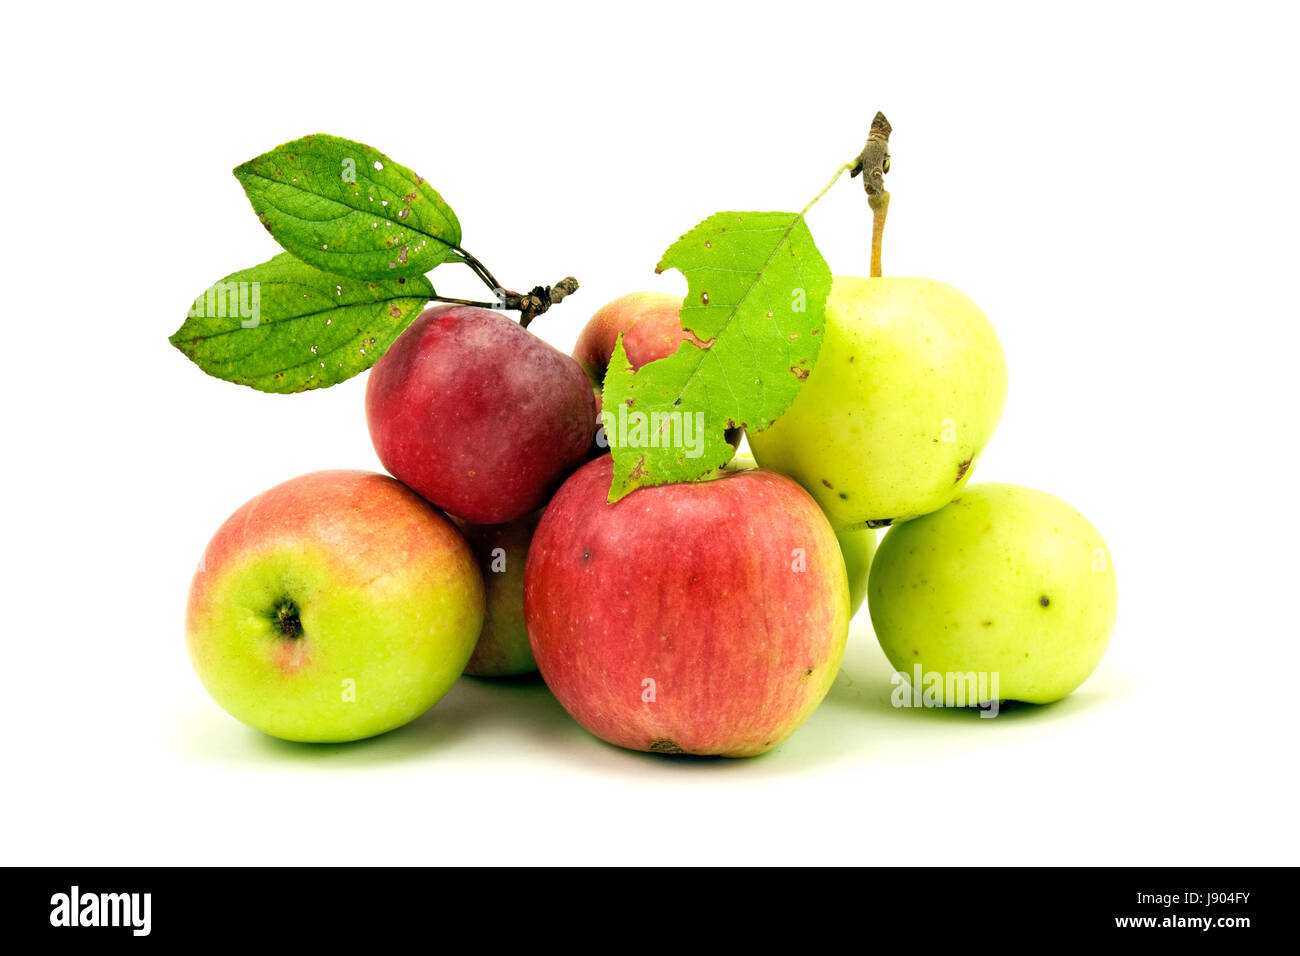 food, aliment, agriculture, farming, fruit, apples, apple, organic, nutrition, Stock Photo